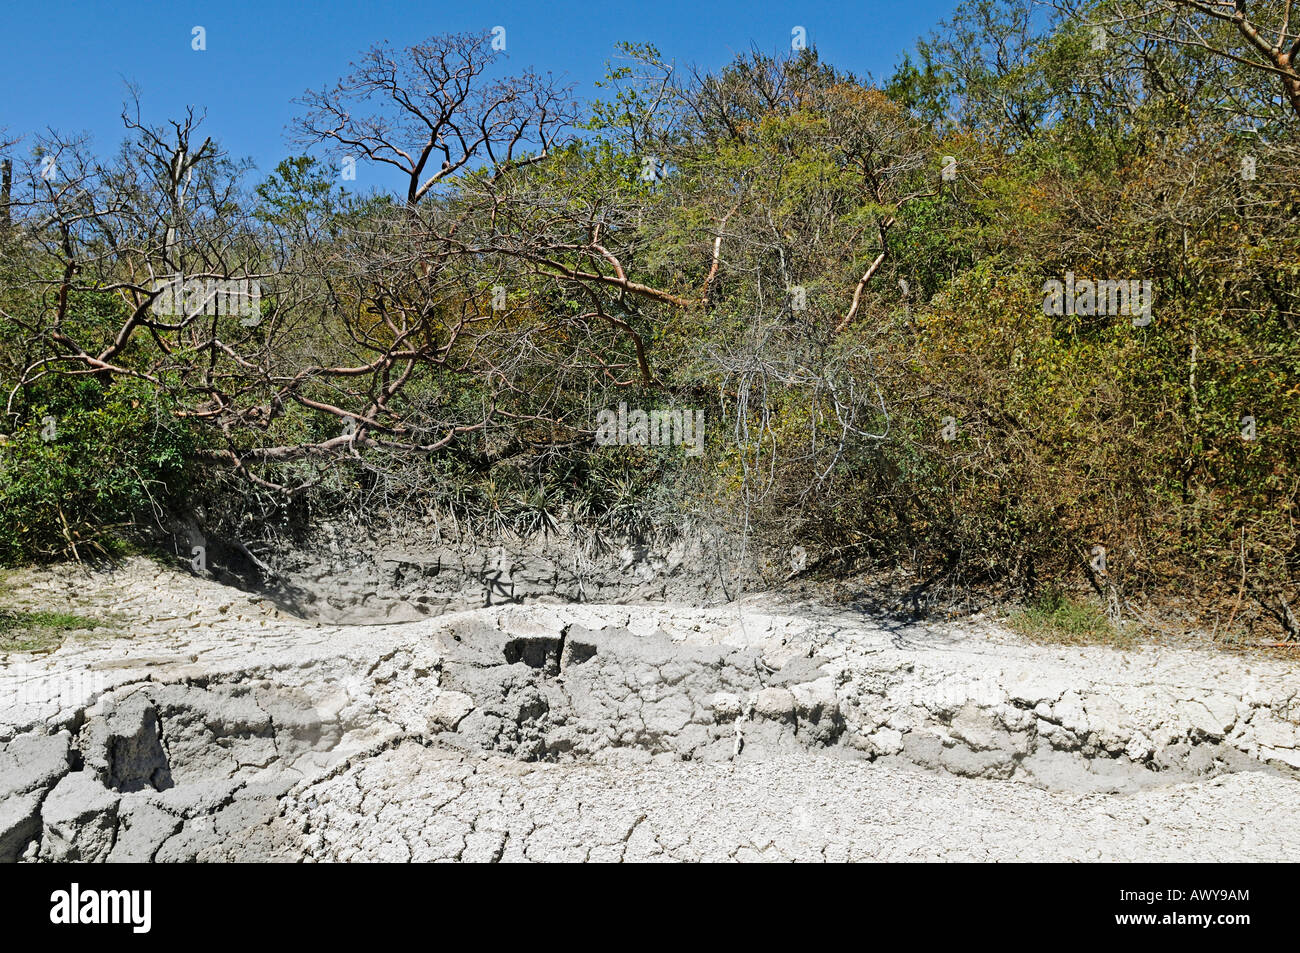 Volcanic hot springs with mud and sulfur, Rincon de la Vieja National Park, Costa Rica, Central America Stock Photo